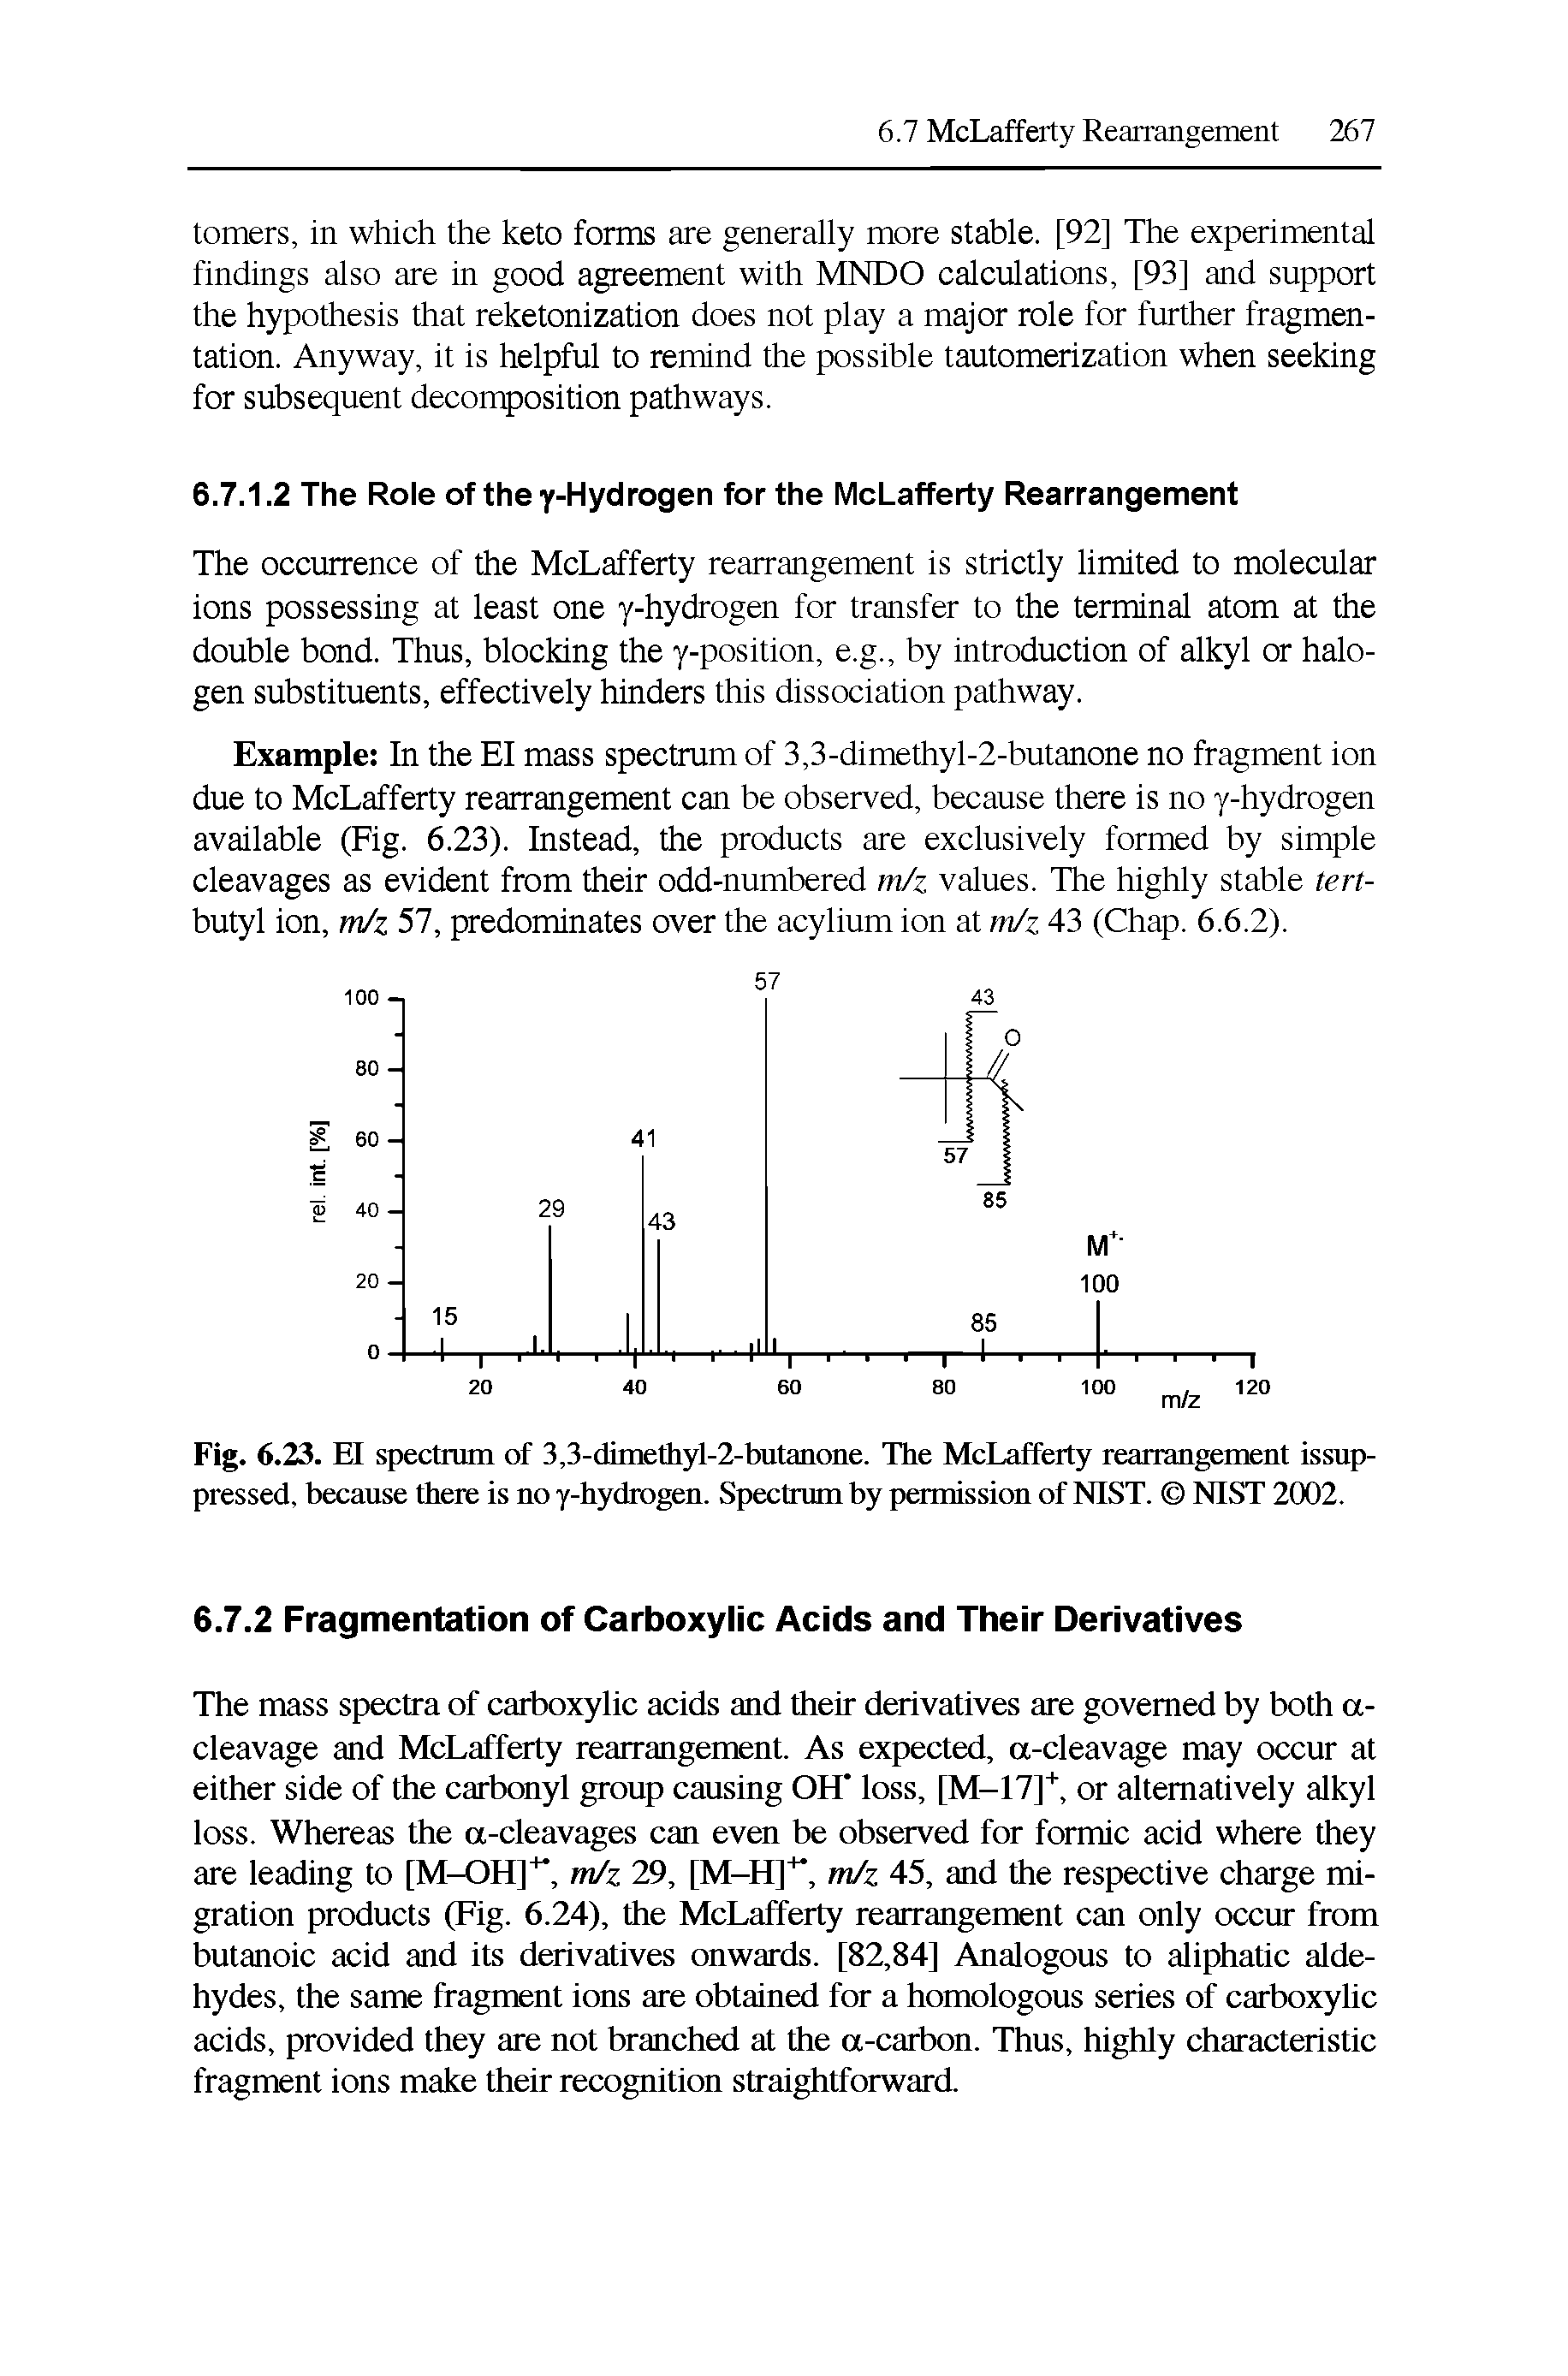 Fig. 6.23. El spectrum of 3,3-dimethyl-2-butaaone. The McLafferty rearrangement issup-pressed, because there is no y-hydrogen. Spectrum by permission of NIST. NIST 2002.